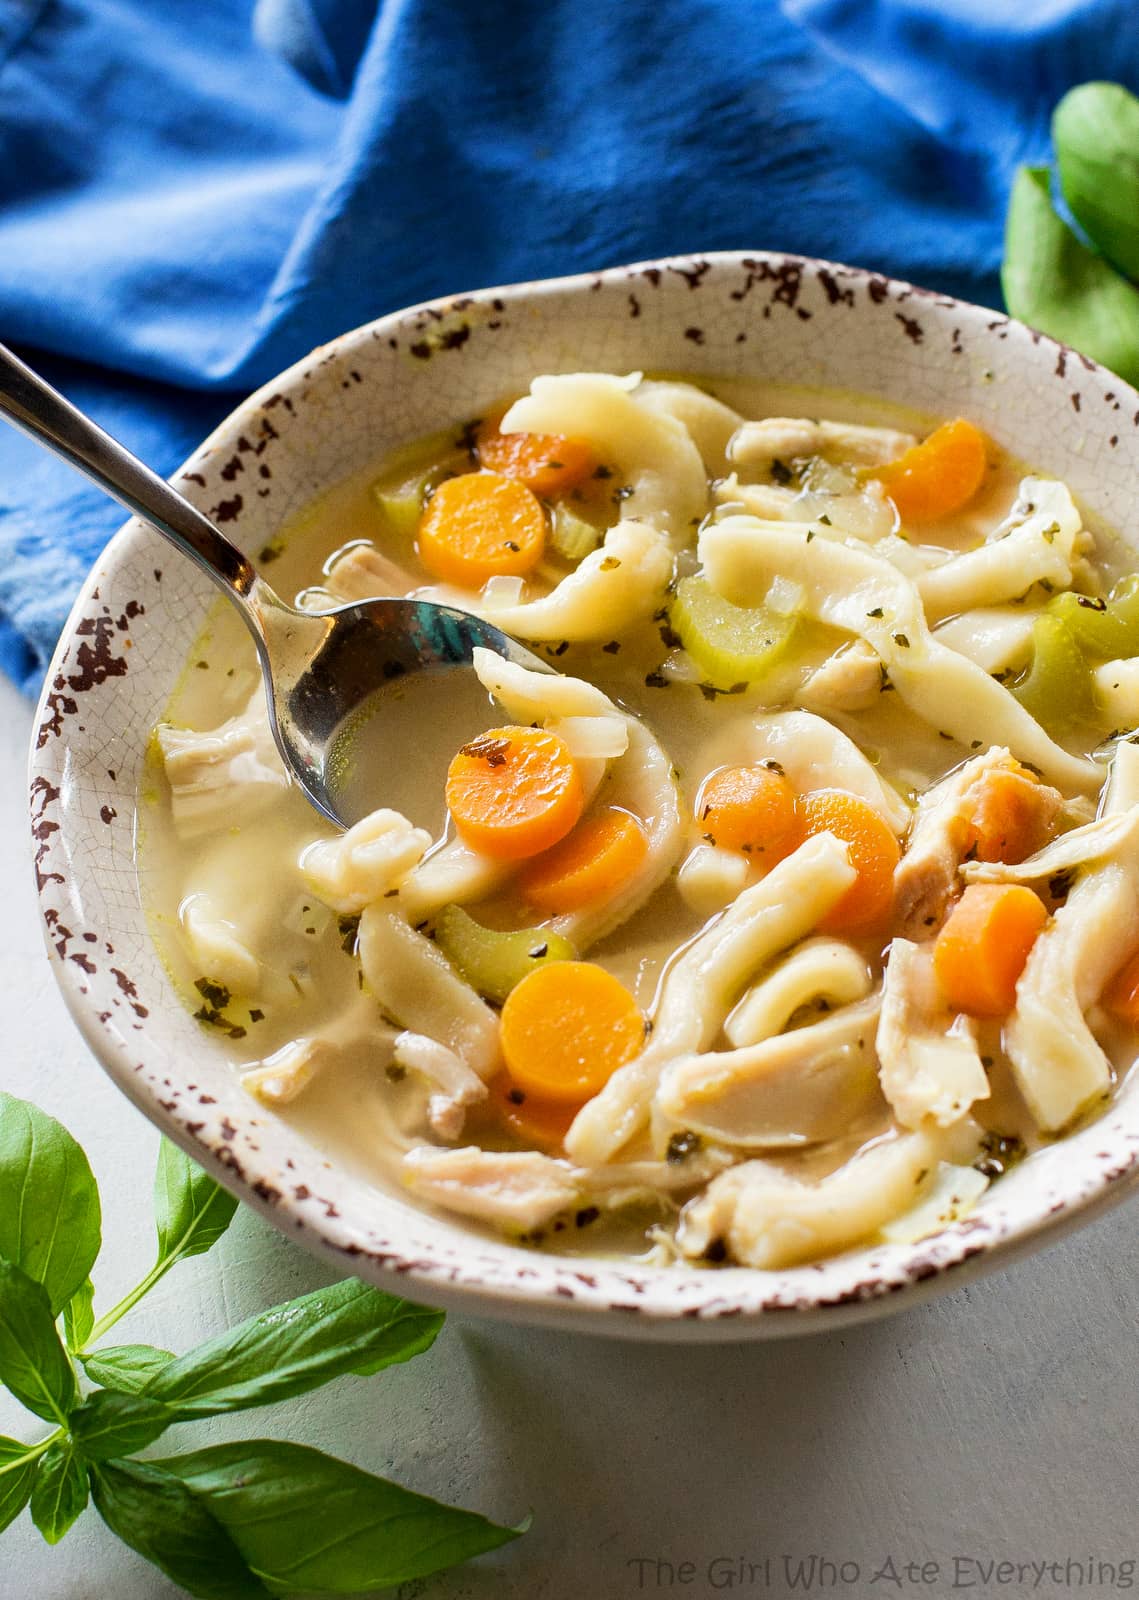 Homemade Chicken Noodle Soup - The Girl Who Ate Everything